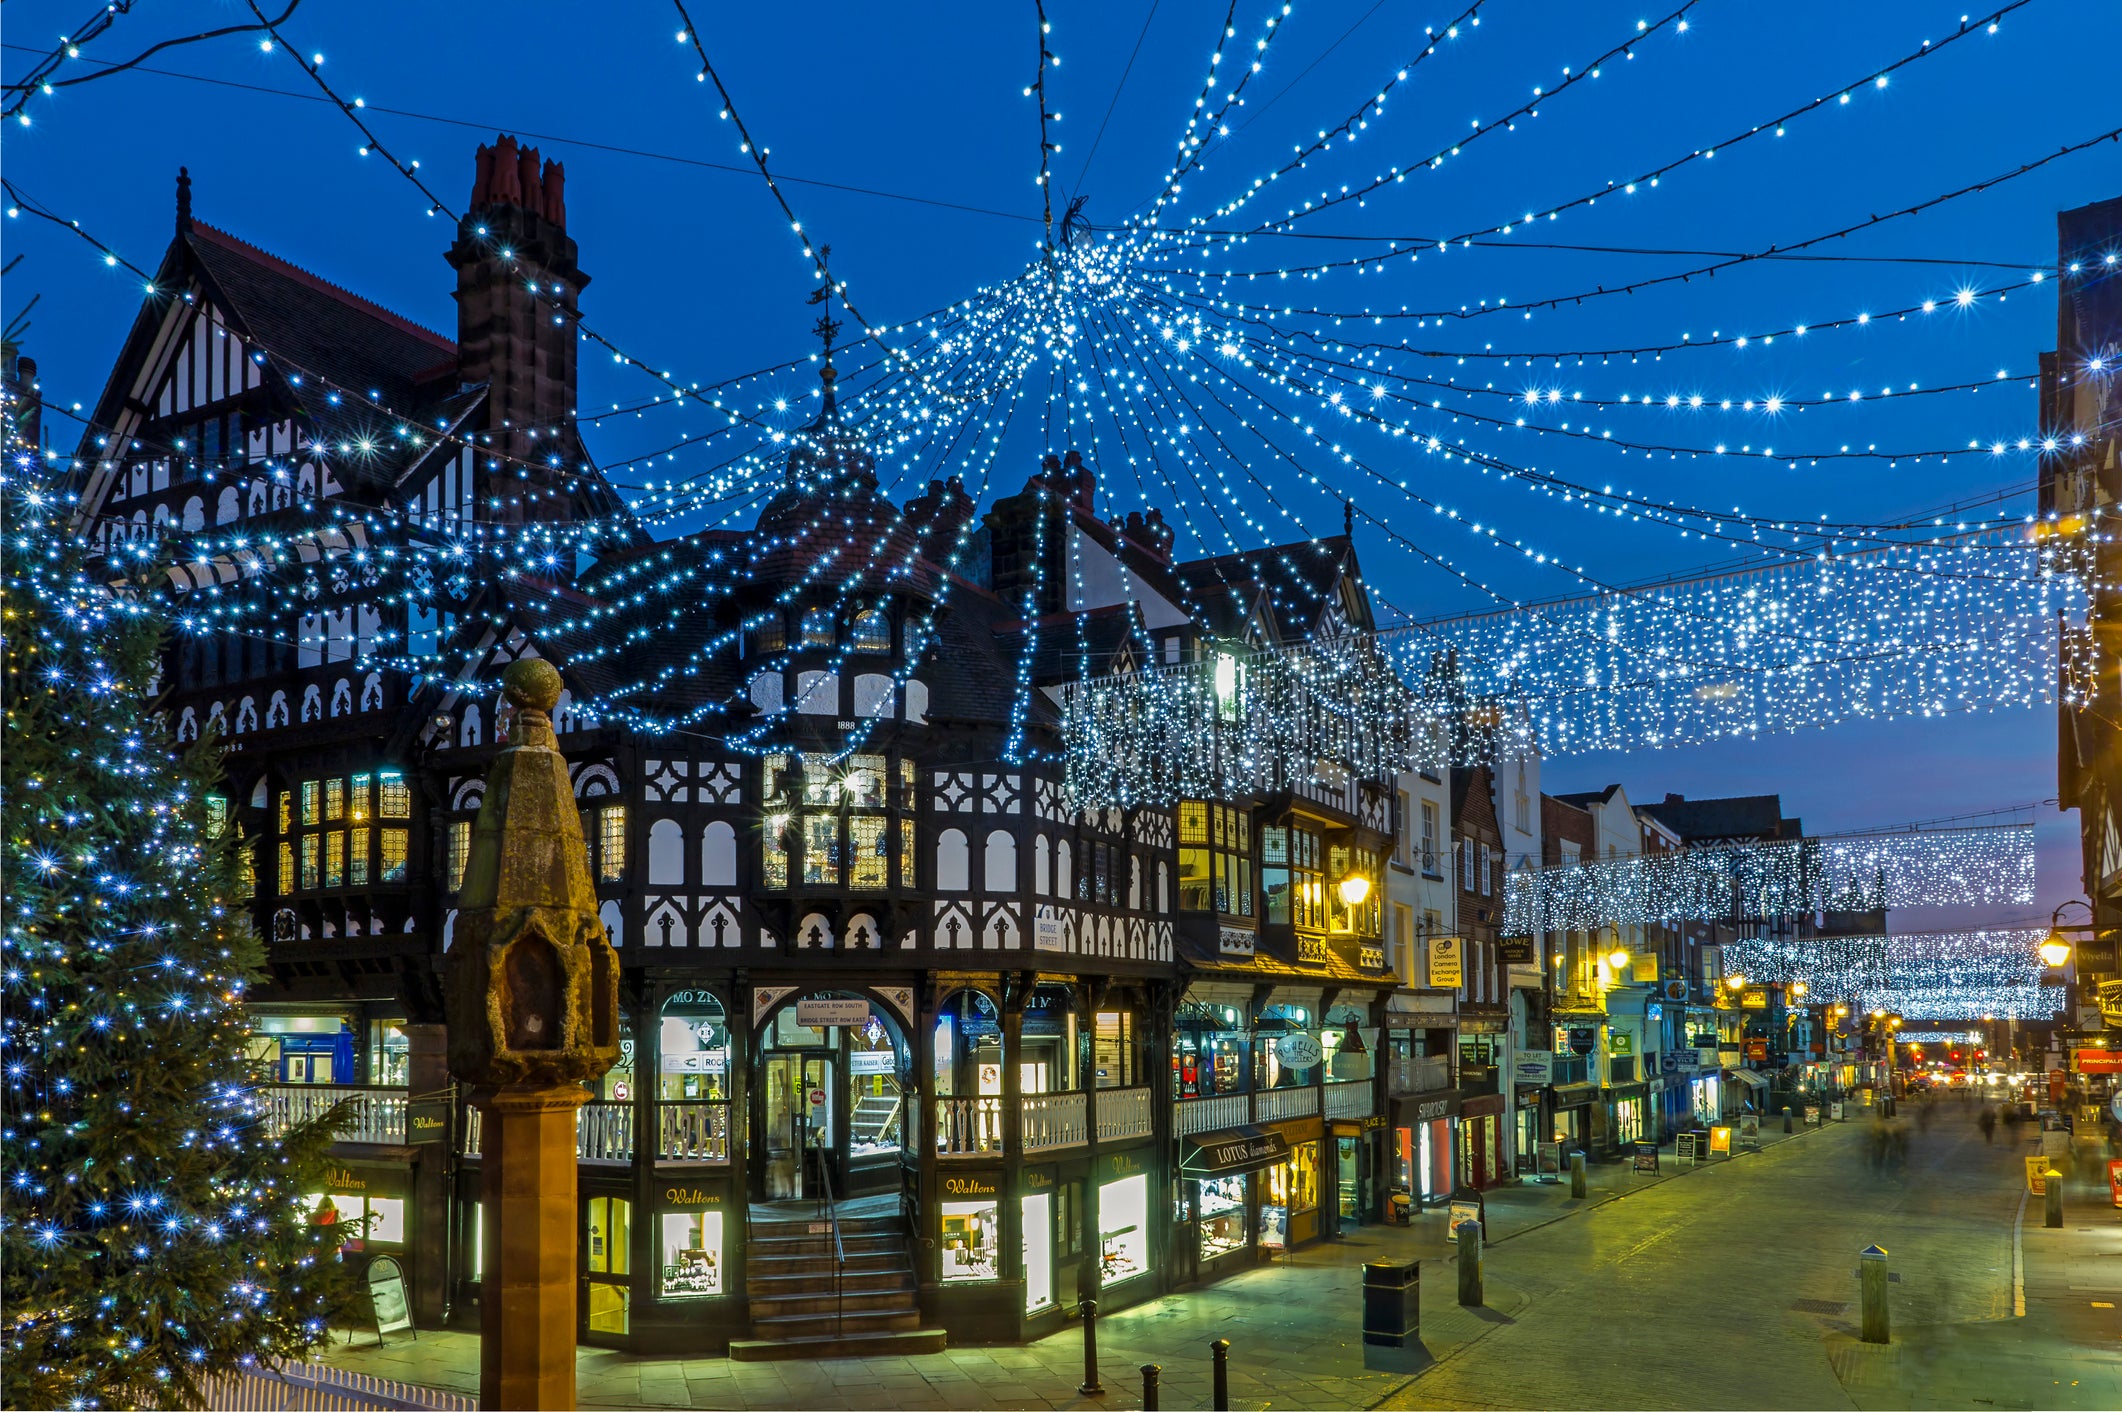 A staycation to historic Chester is full of festive feasts and old-world charm